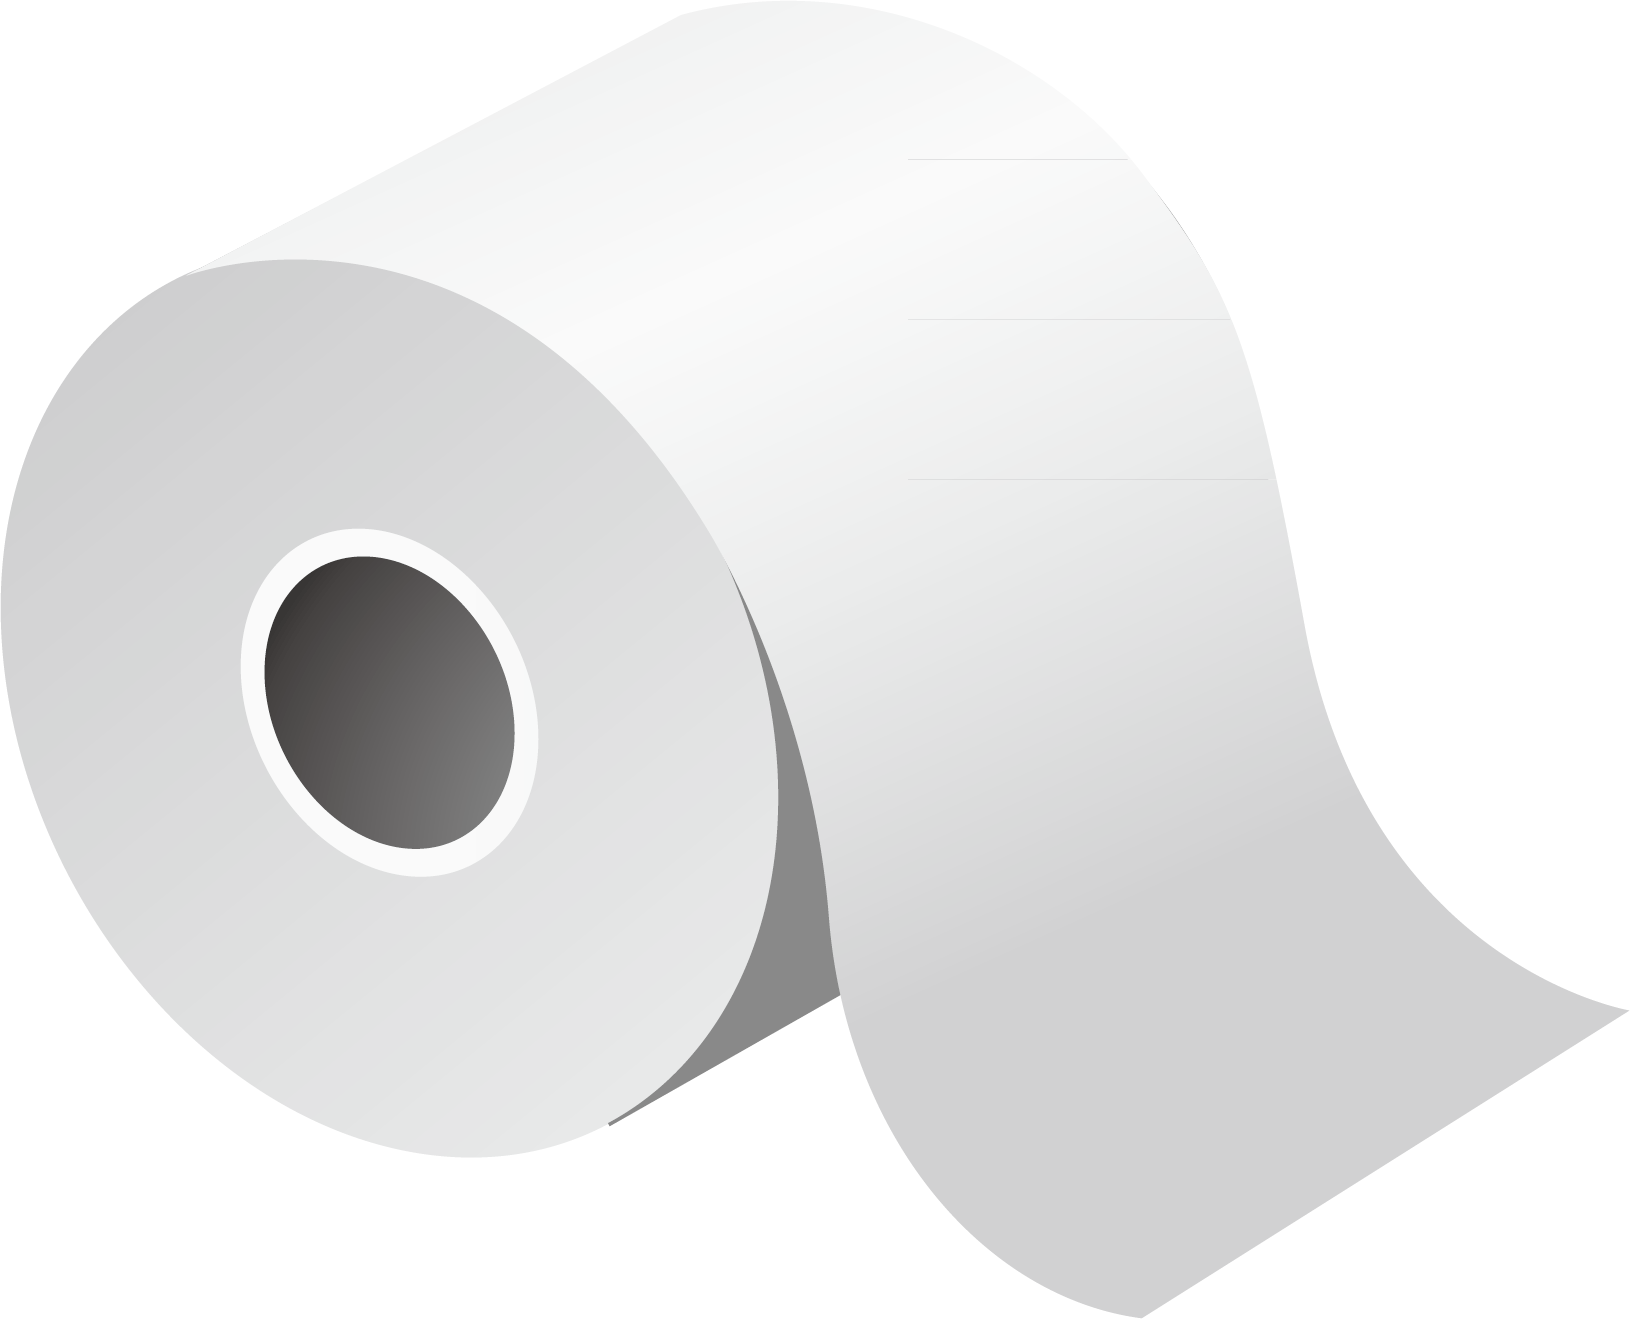 Toilet Paper Picture Free HQ Image PNG Image